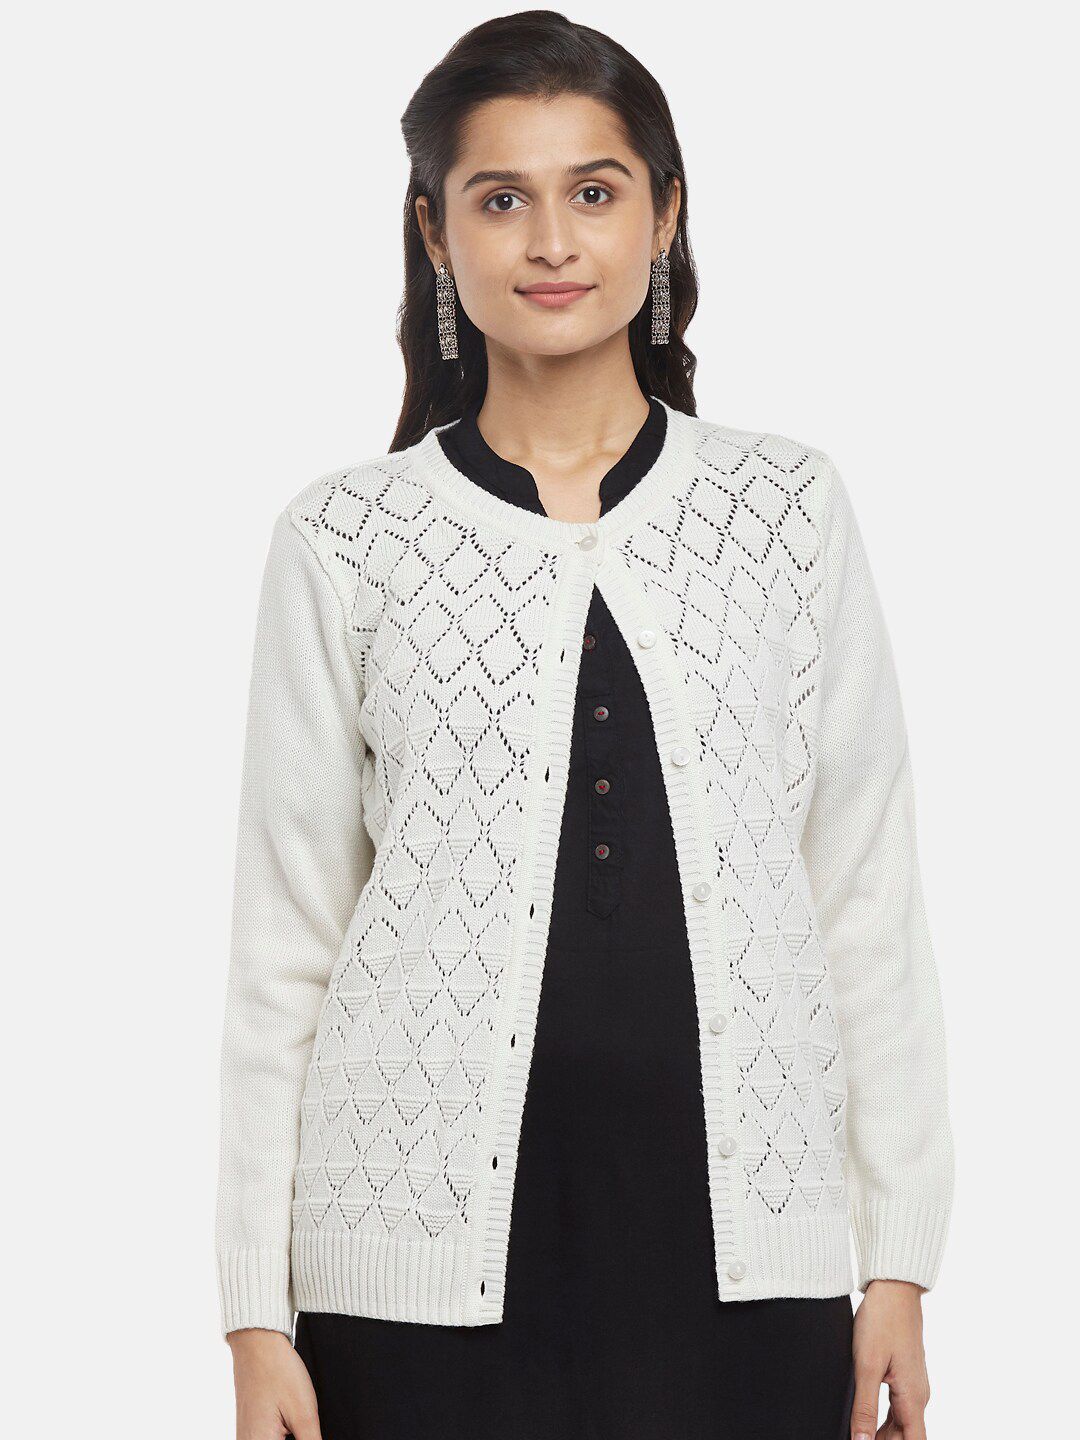 RANGMANCH BY PANTALOONS Women Off White Acrylic Cardigan Price in India